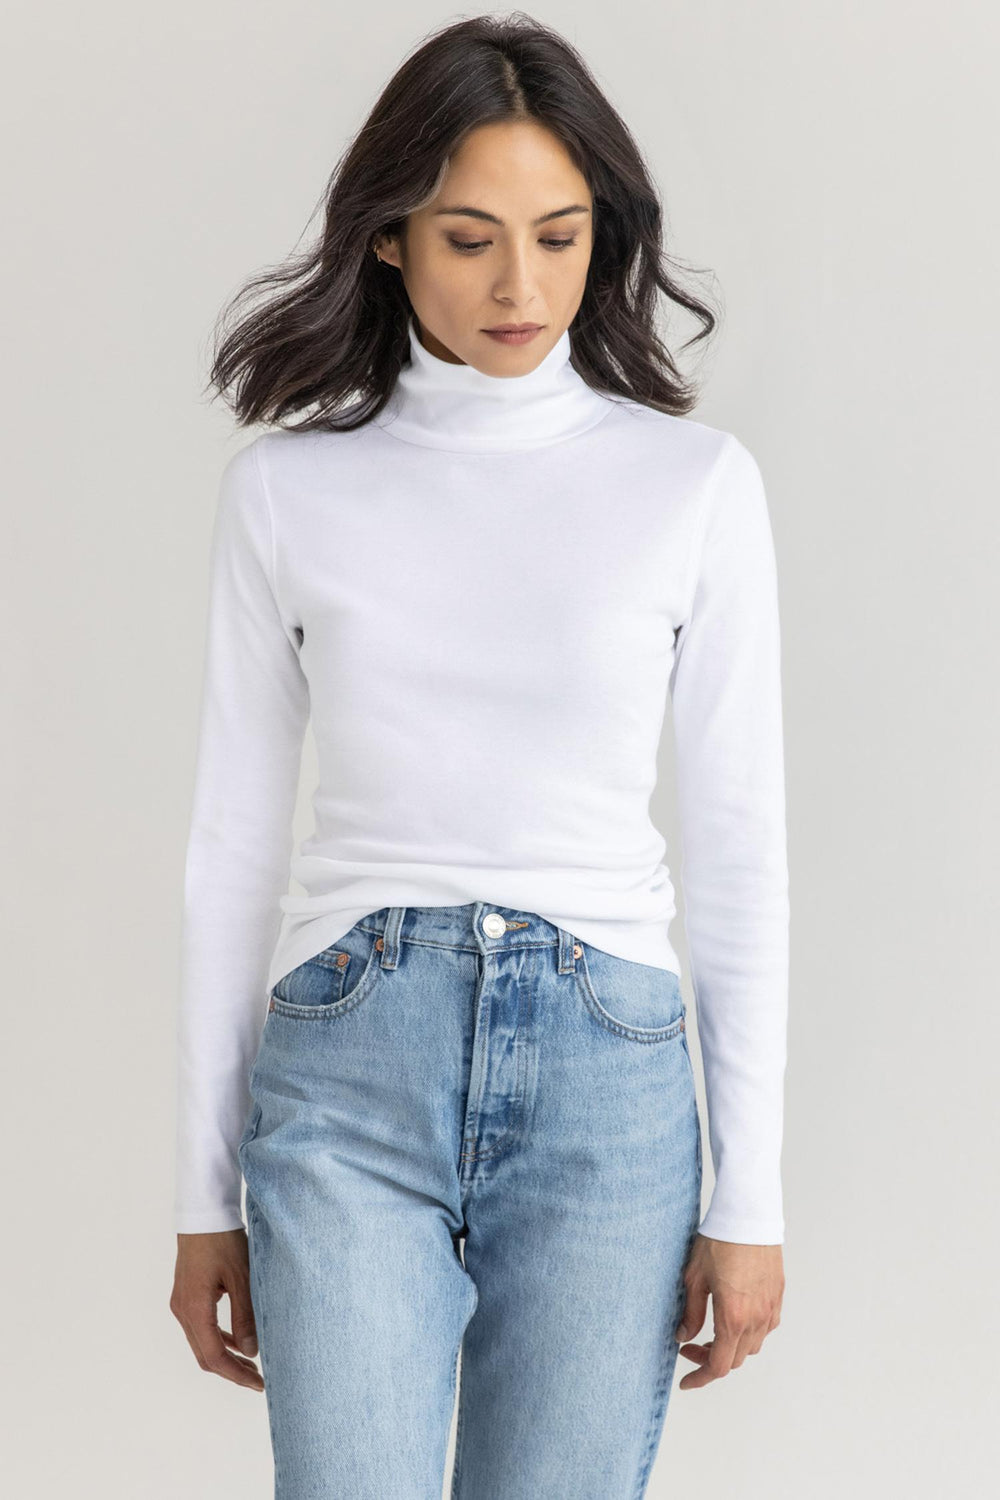 Long Sleeve Turtle Neck Tee in White - Madison's Niche 